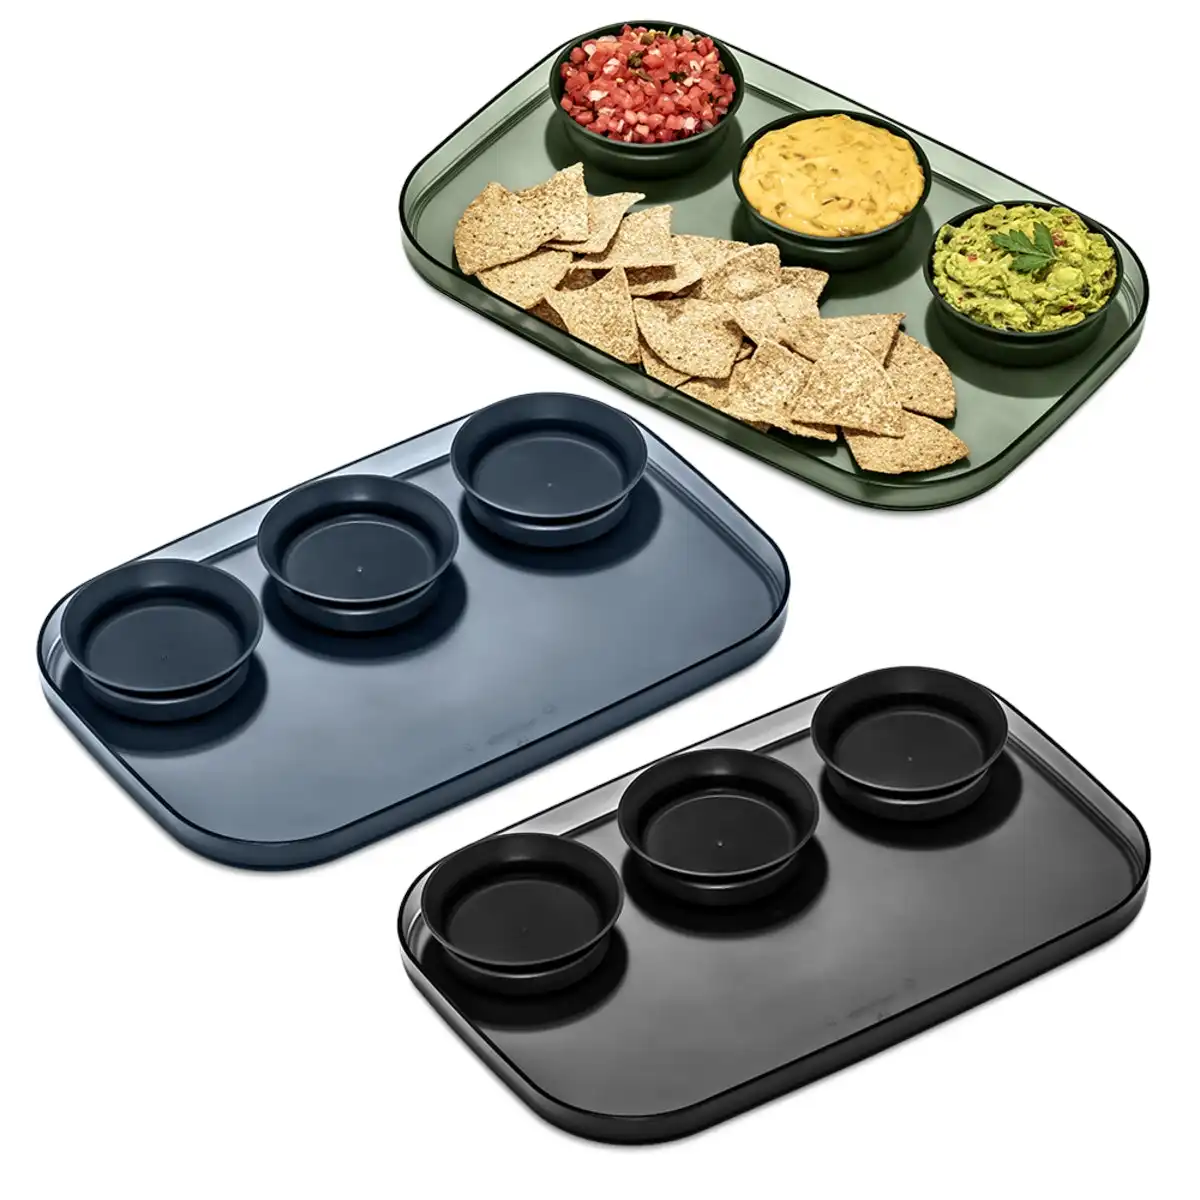 Madesmart Large Serving Tray With 3 Bowls 39 X 25cm